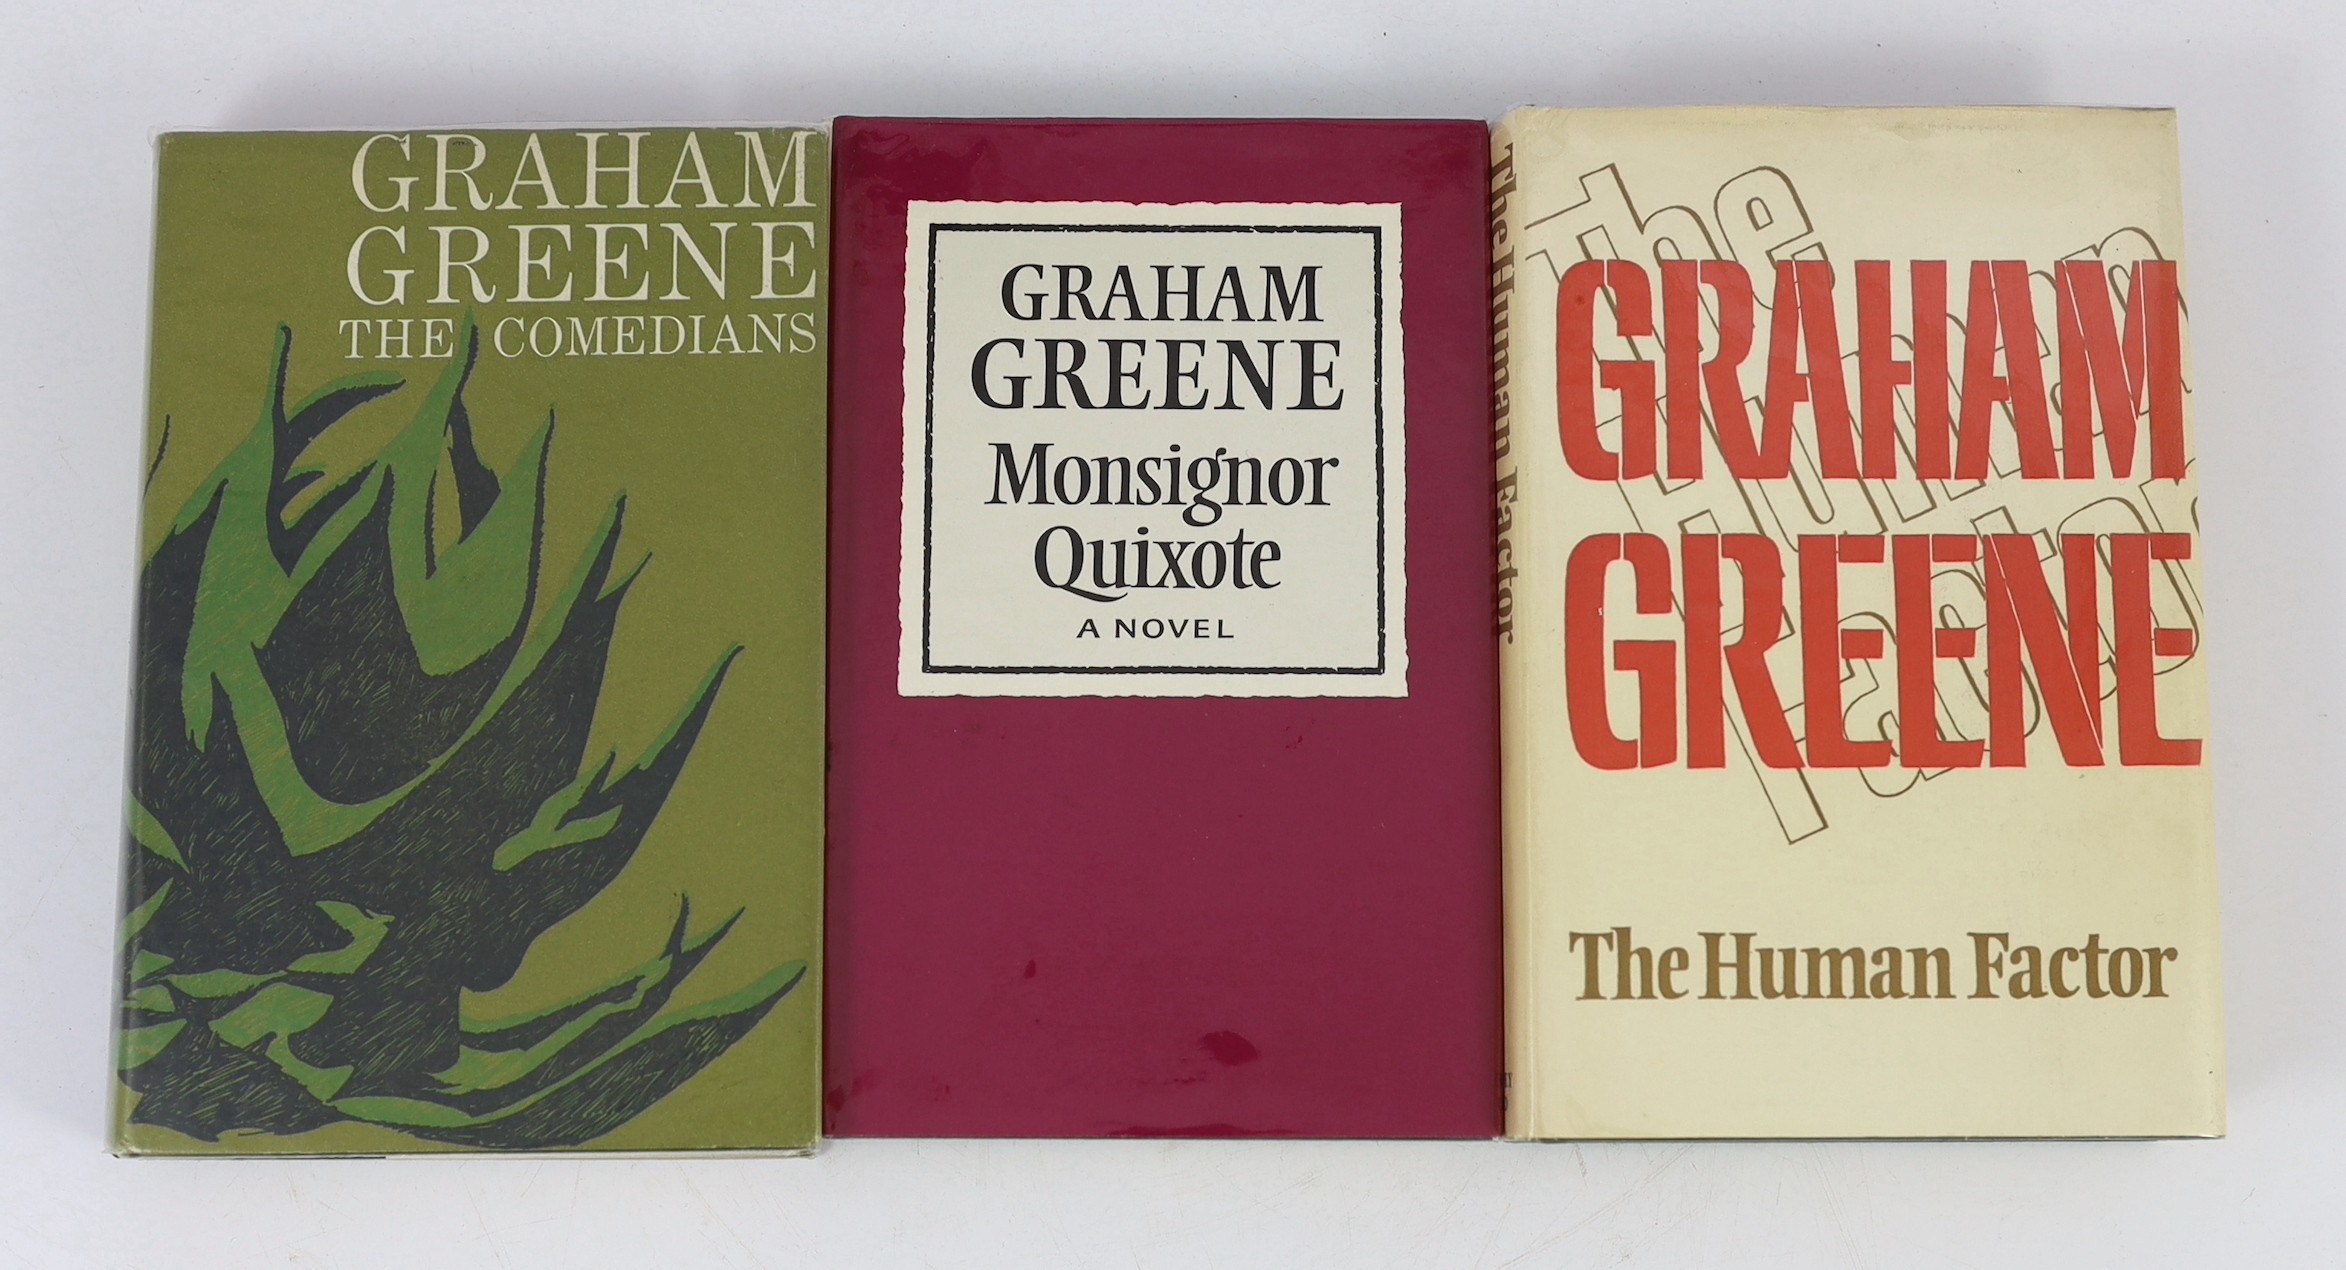 Greene, Graham - 6 first editions, in original unclipped d/j’s - The Quiet American, 1955; Our Man in Havana, 1958; The Comedians, 1966; The Honorary Consul, 1973; The Human Factor, 1978; Monsignor Quixote, 1982 and - Sh